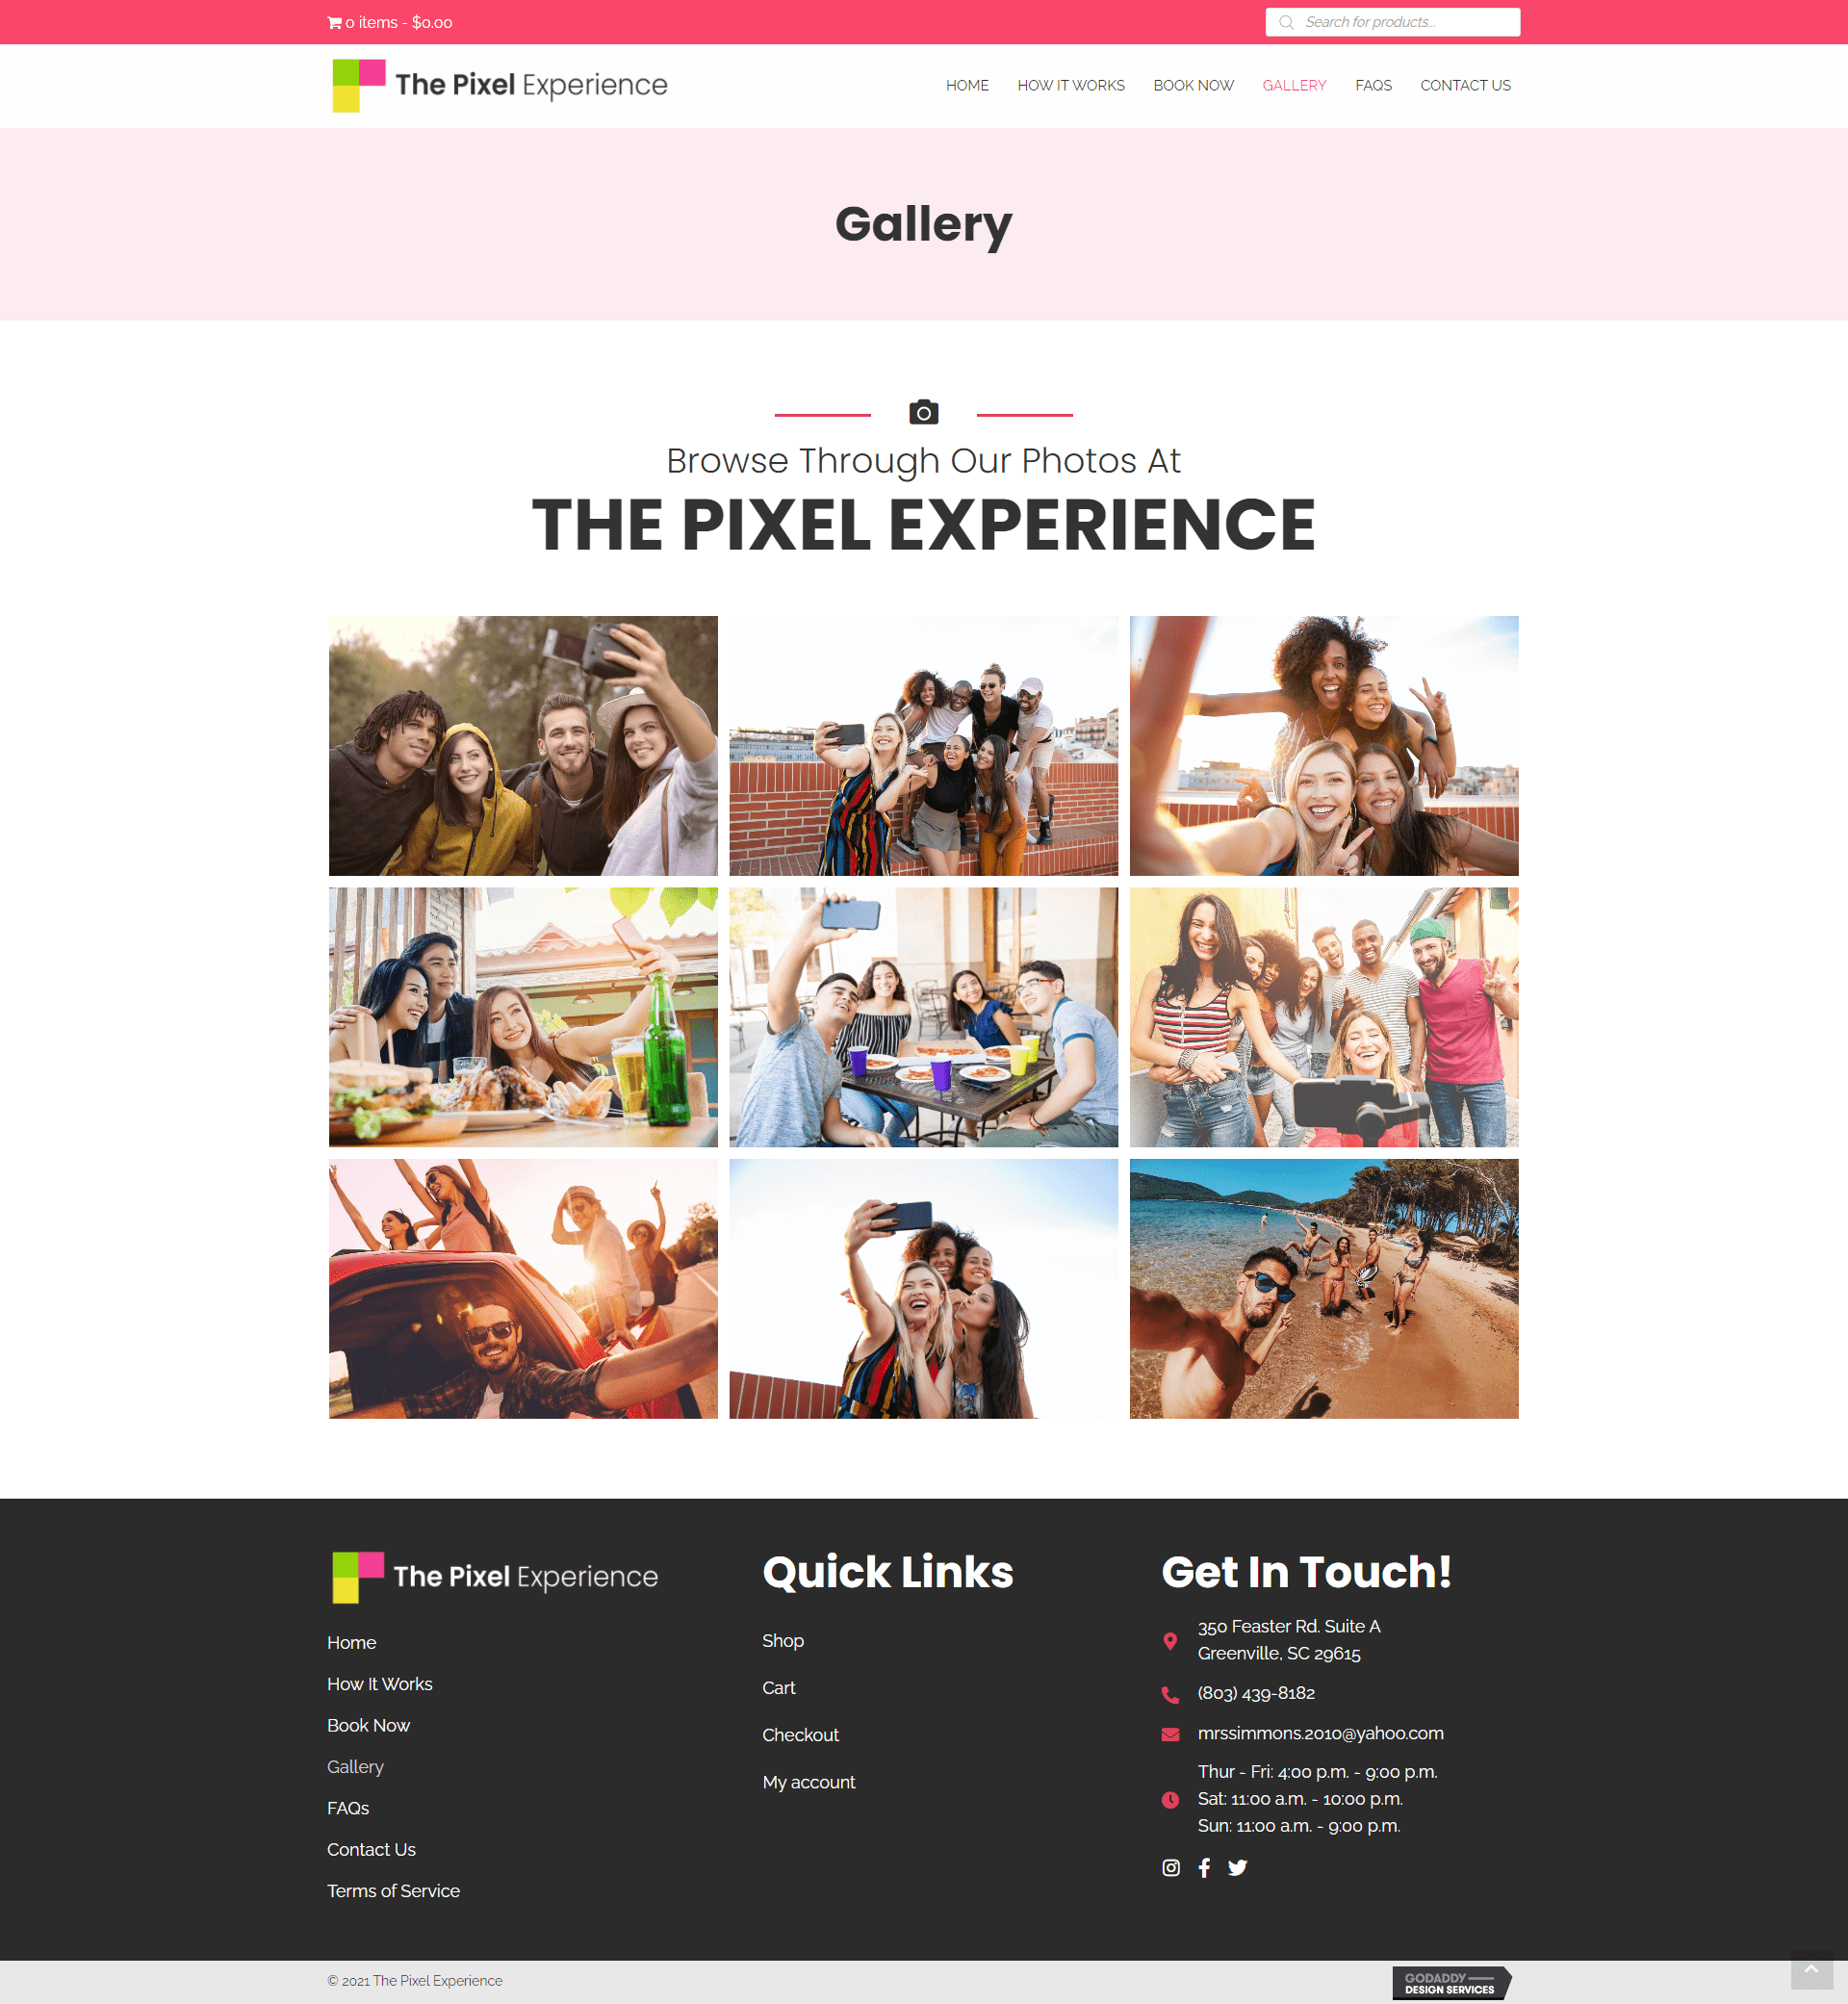 The Pixel Experience Gallery